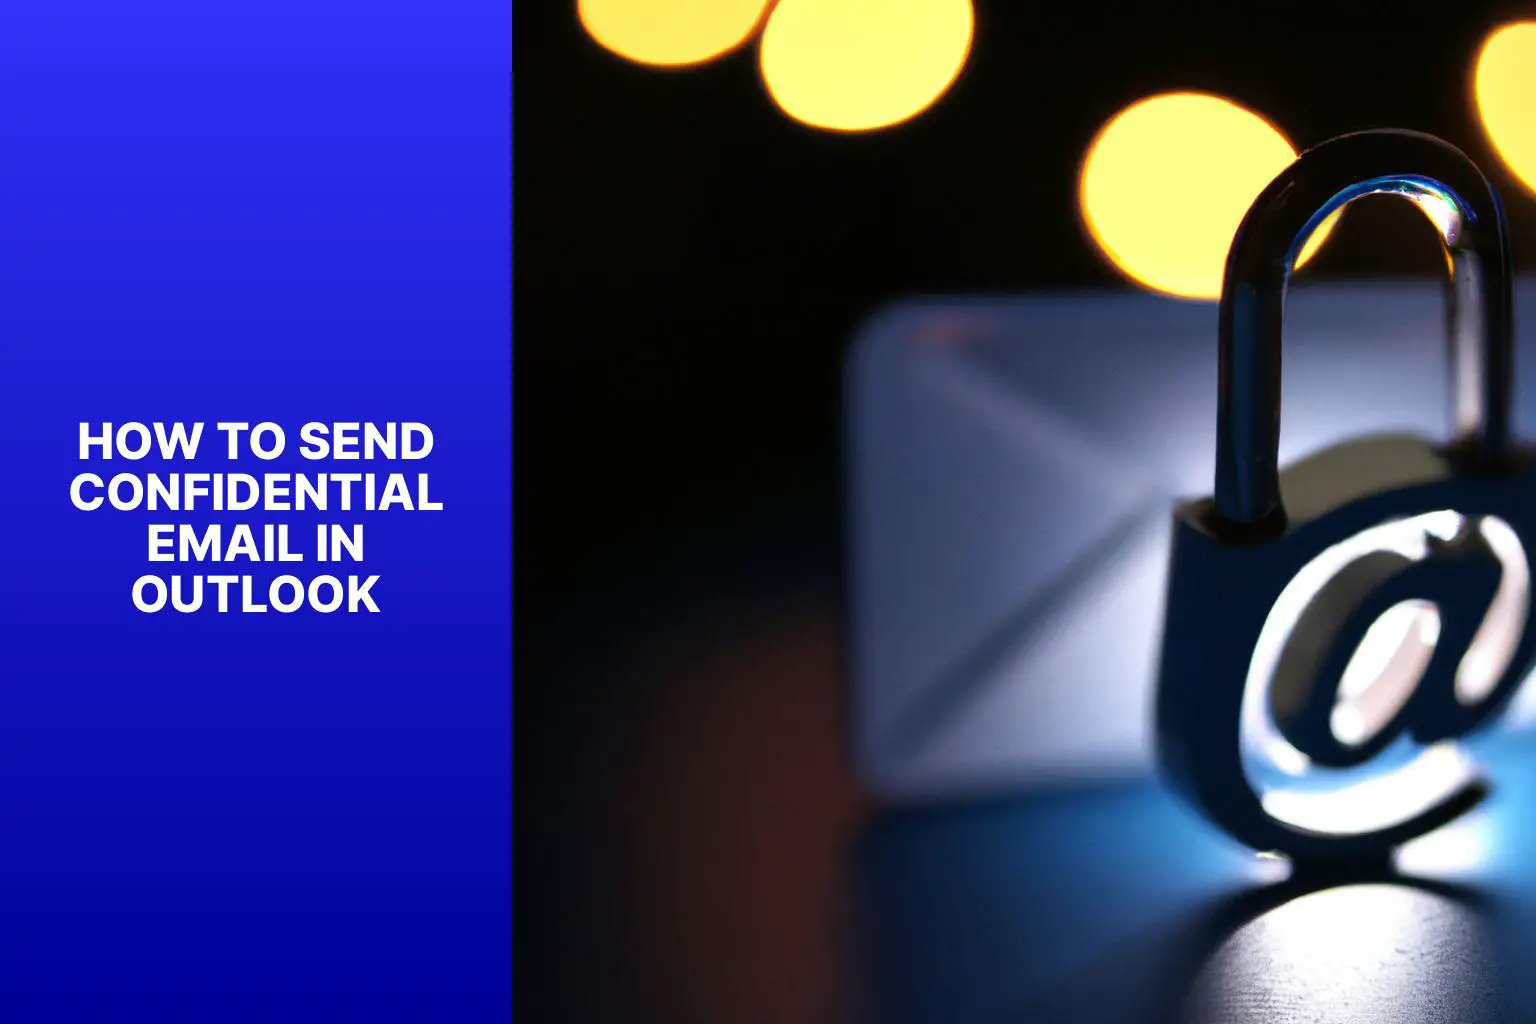 Learn How to Easily Send Confidential Emails in Outlook – Step-by-Step Guide